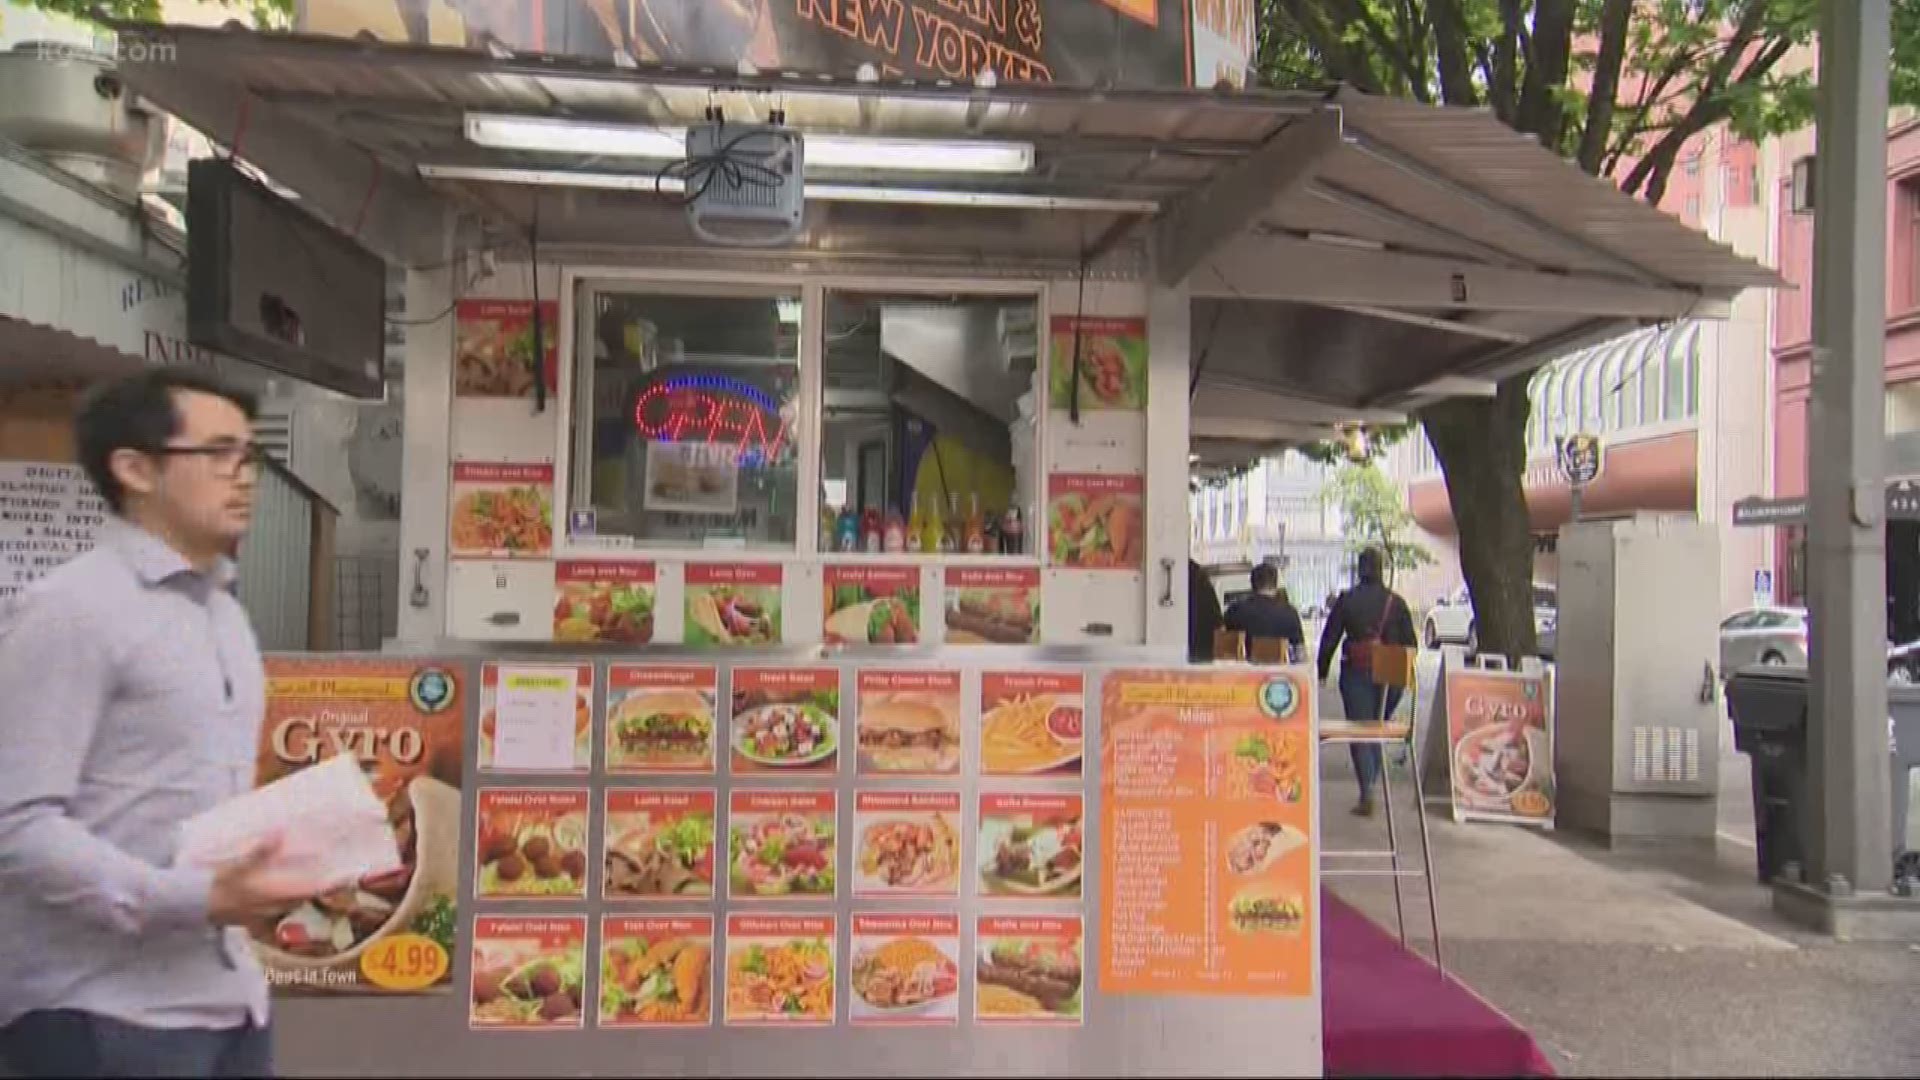 A woman seen on video being attacked by a Portland food cart owner says she forgives him.